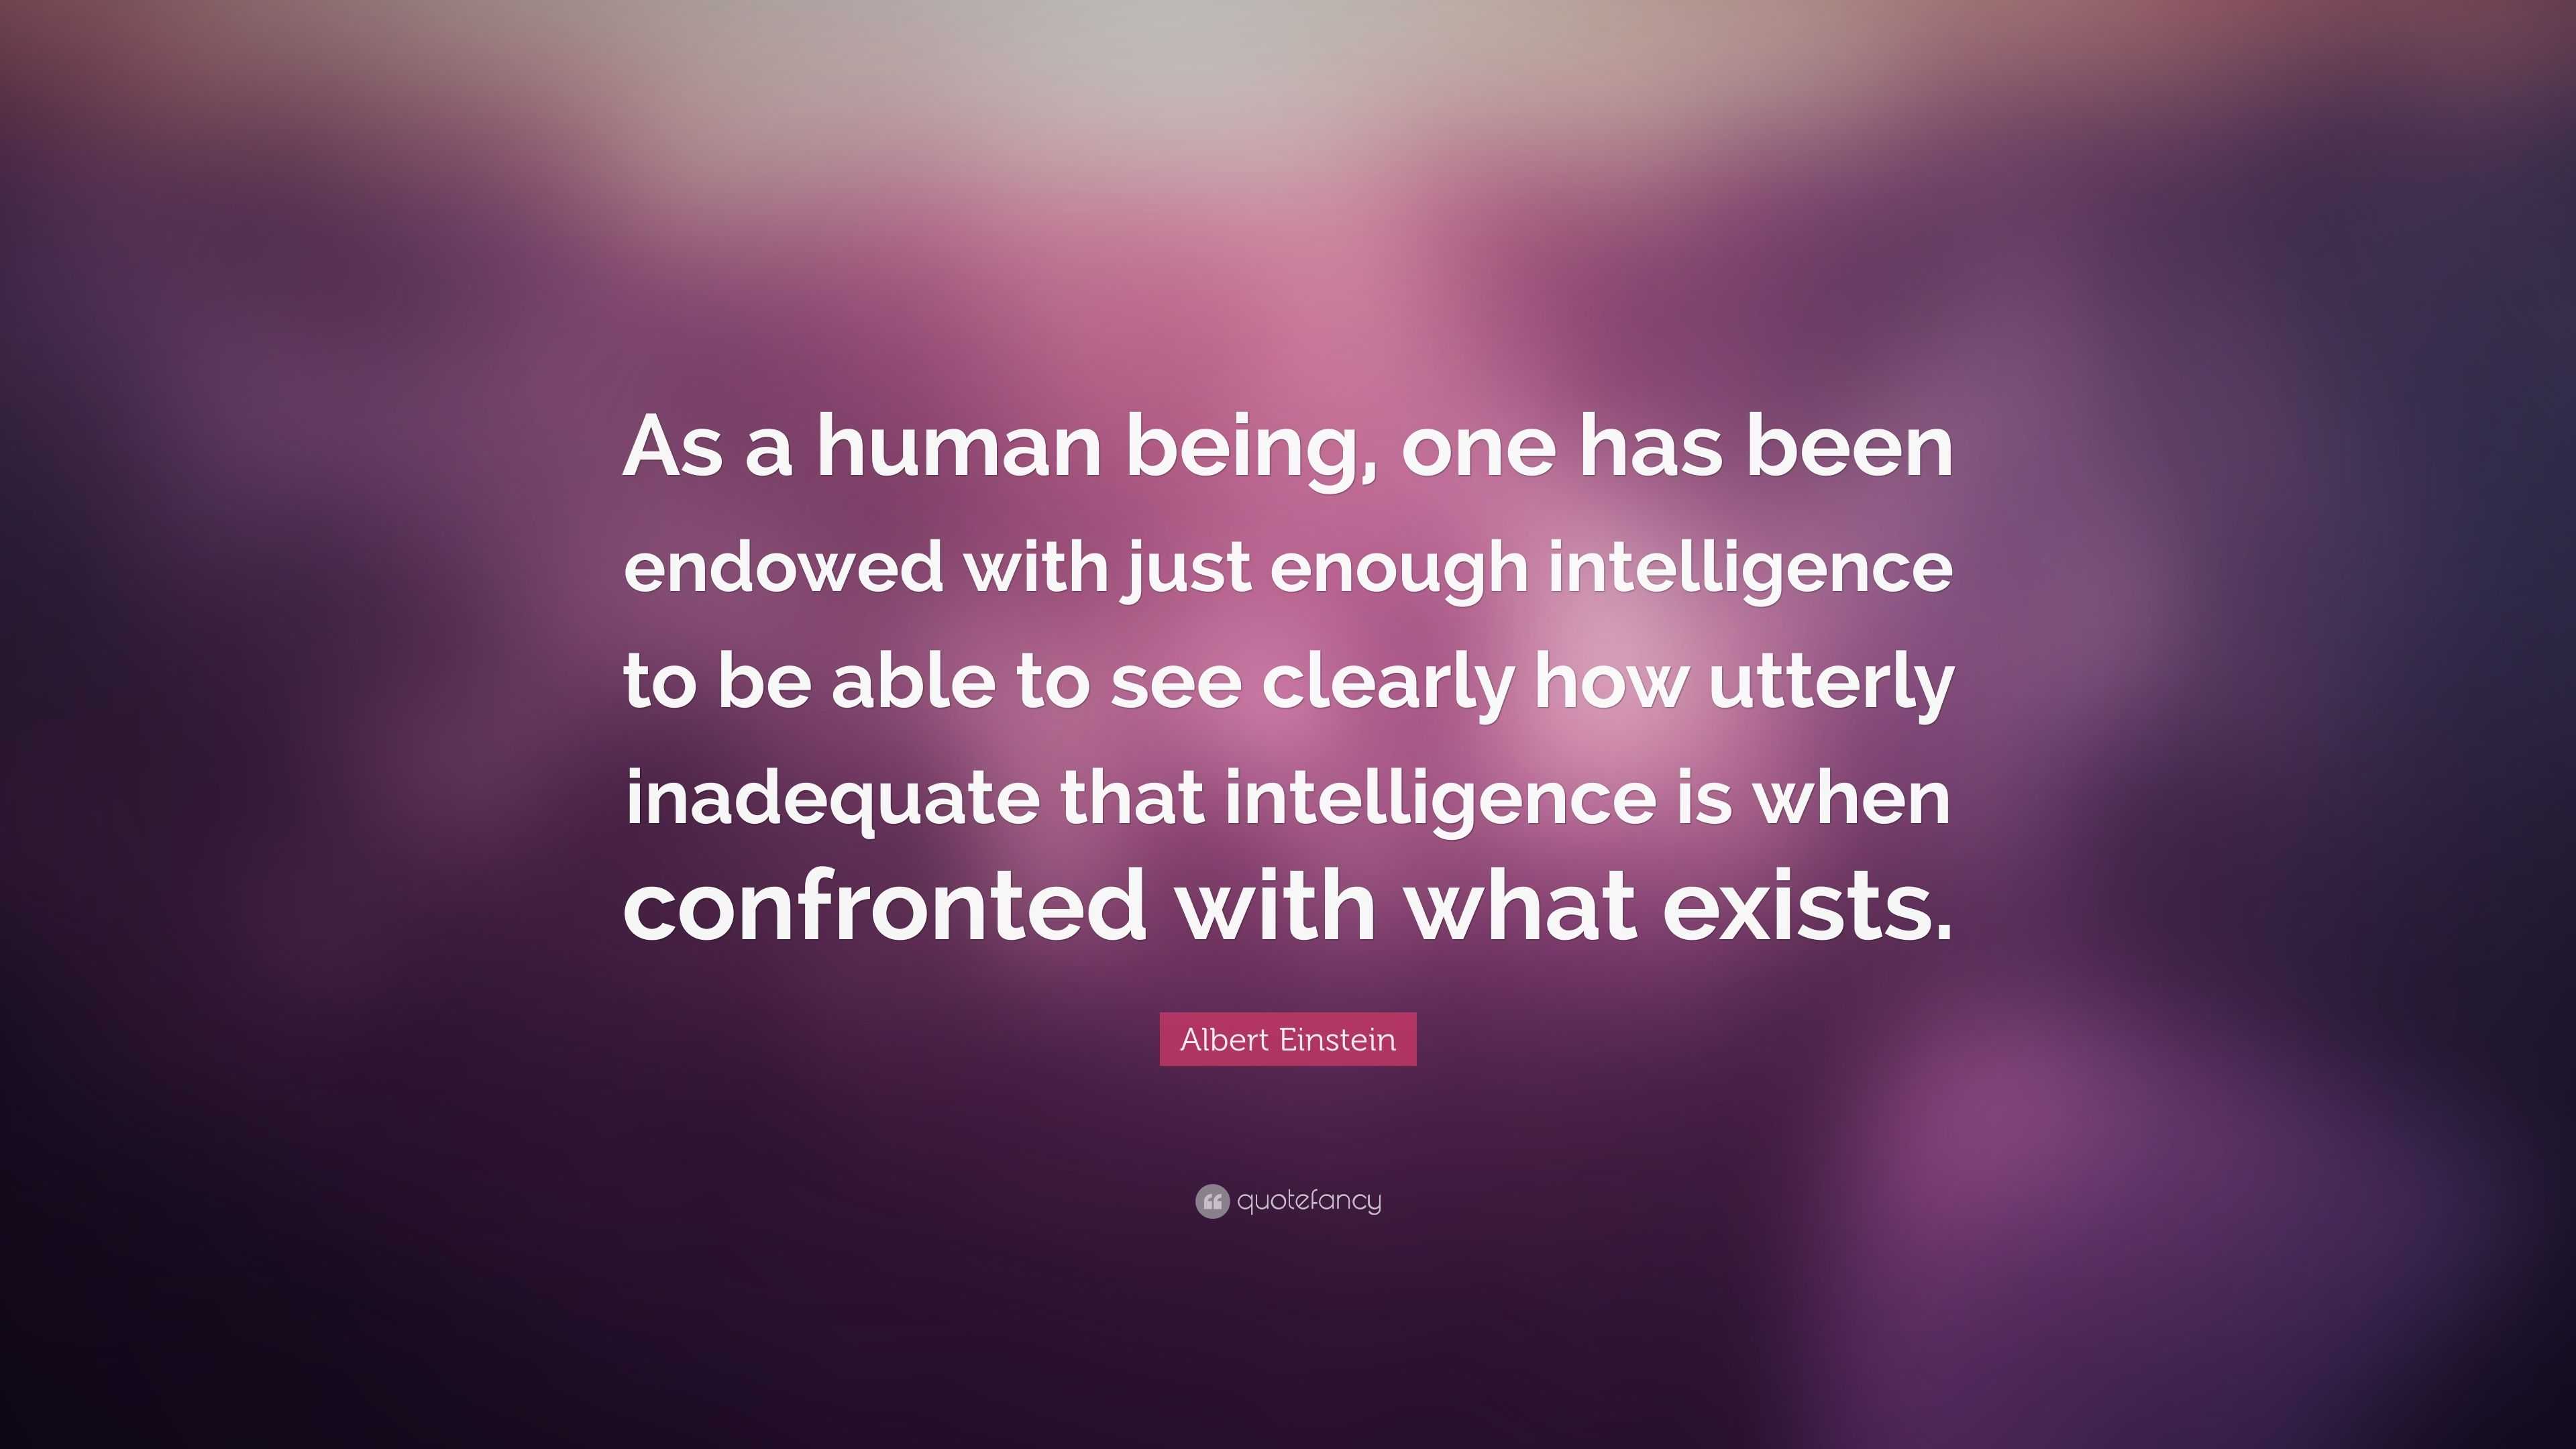 Albert Einstein Quote: “As a human being, one has been endowed with ...